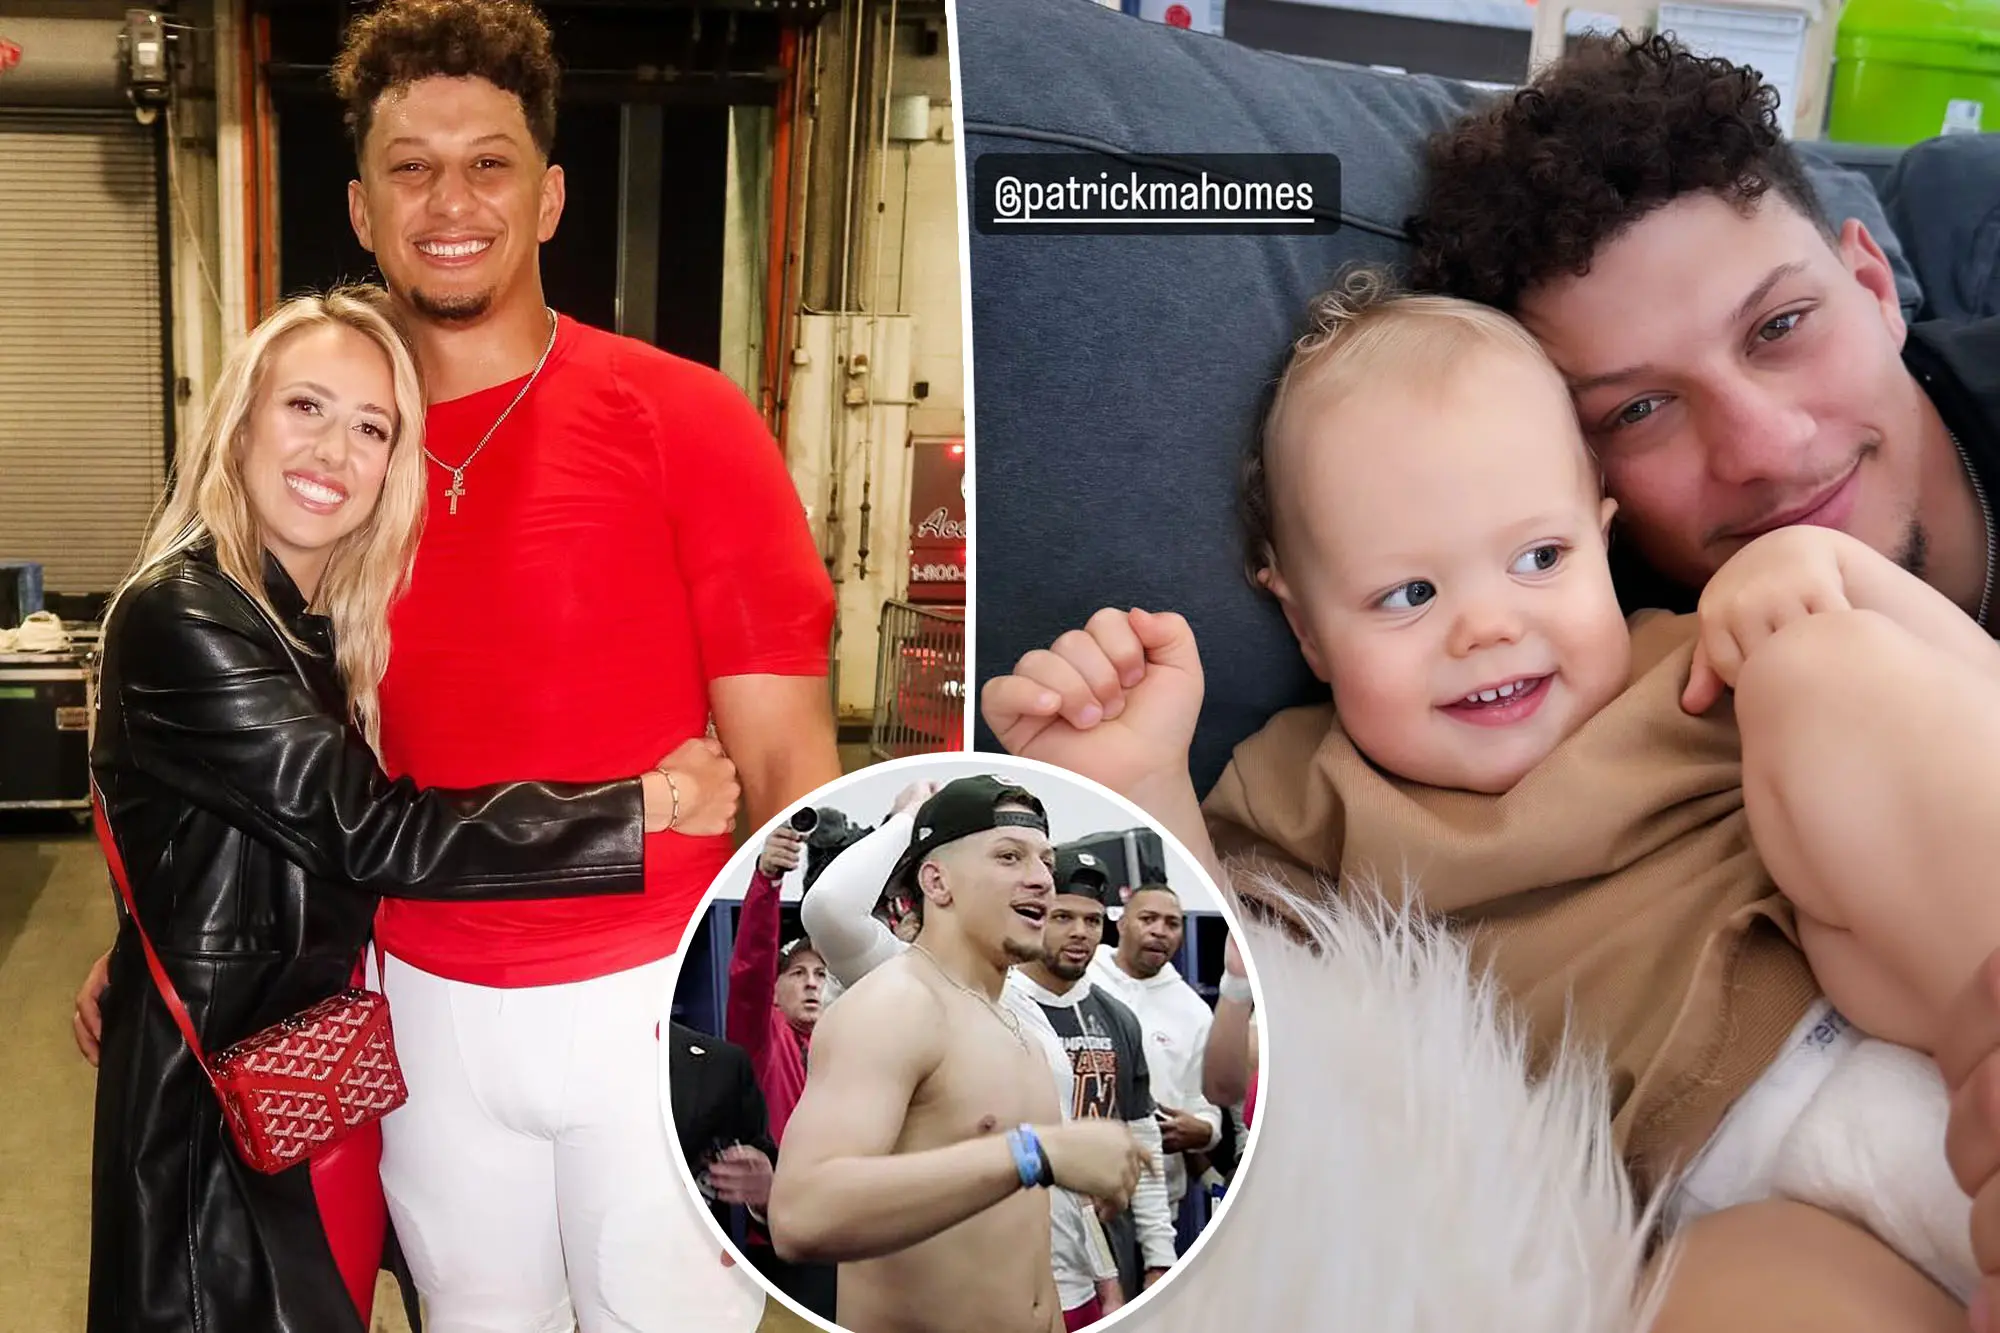 Brittany Mahomes swoons over her "hottttttt hubby" Patrick after he stands up for his "dad bod."